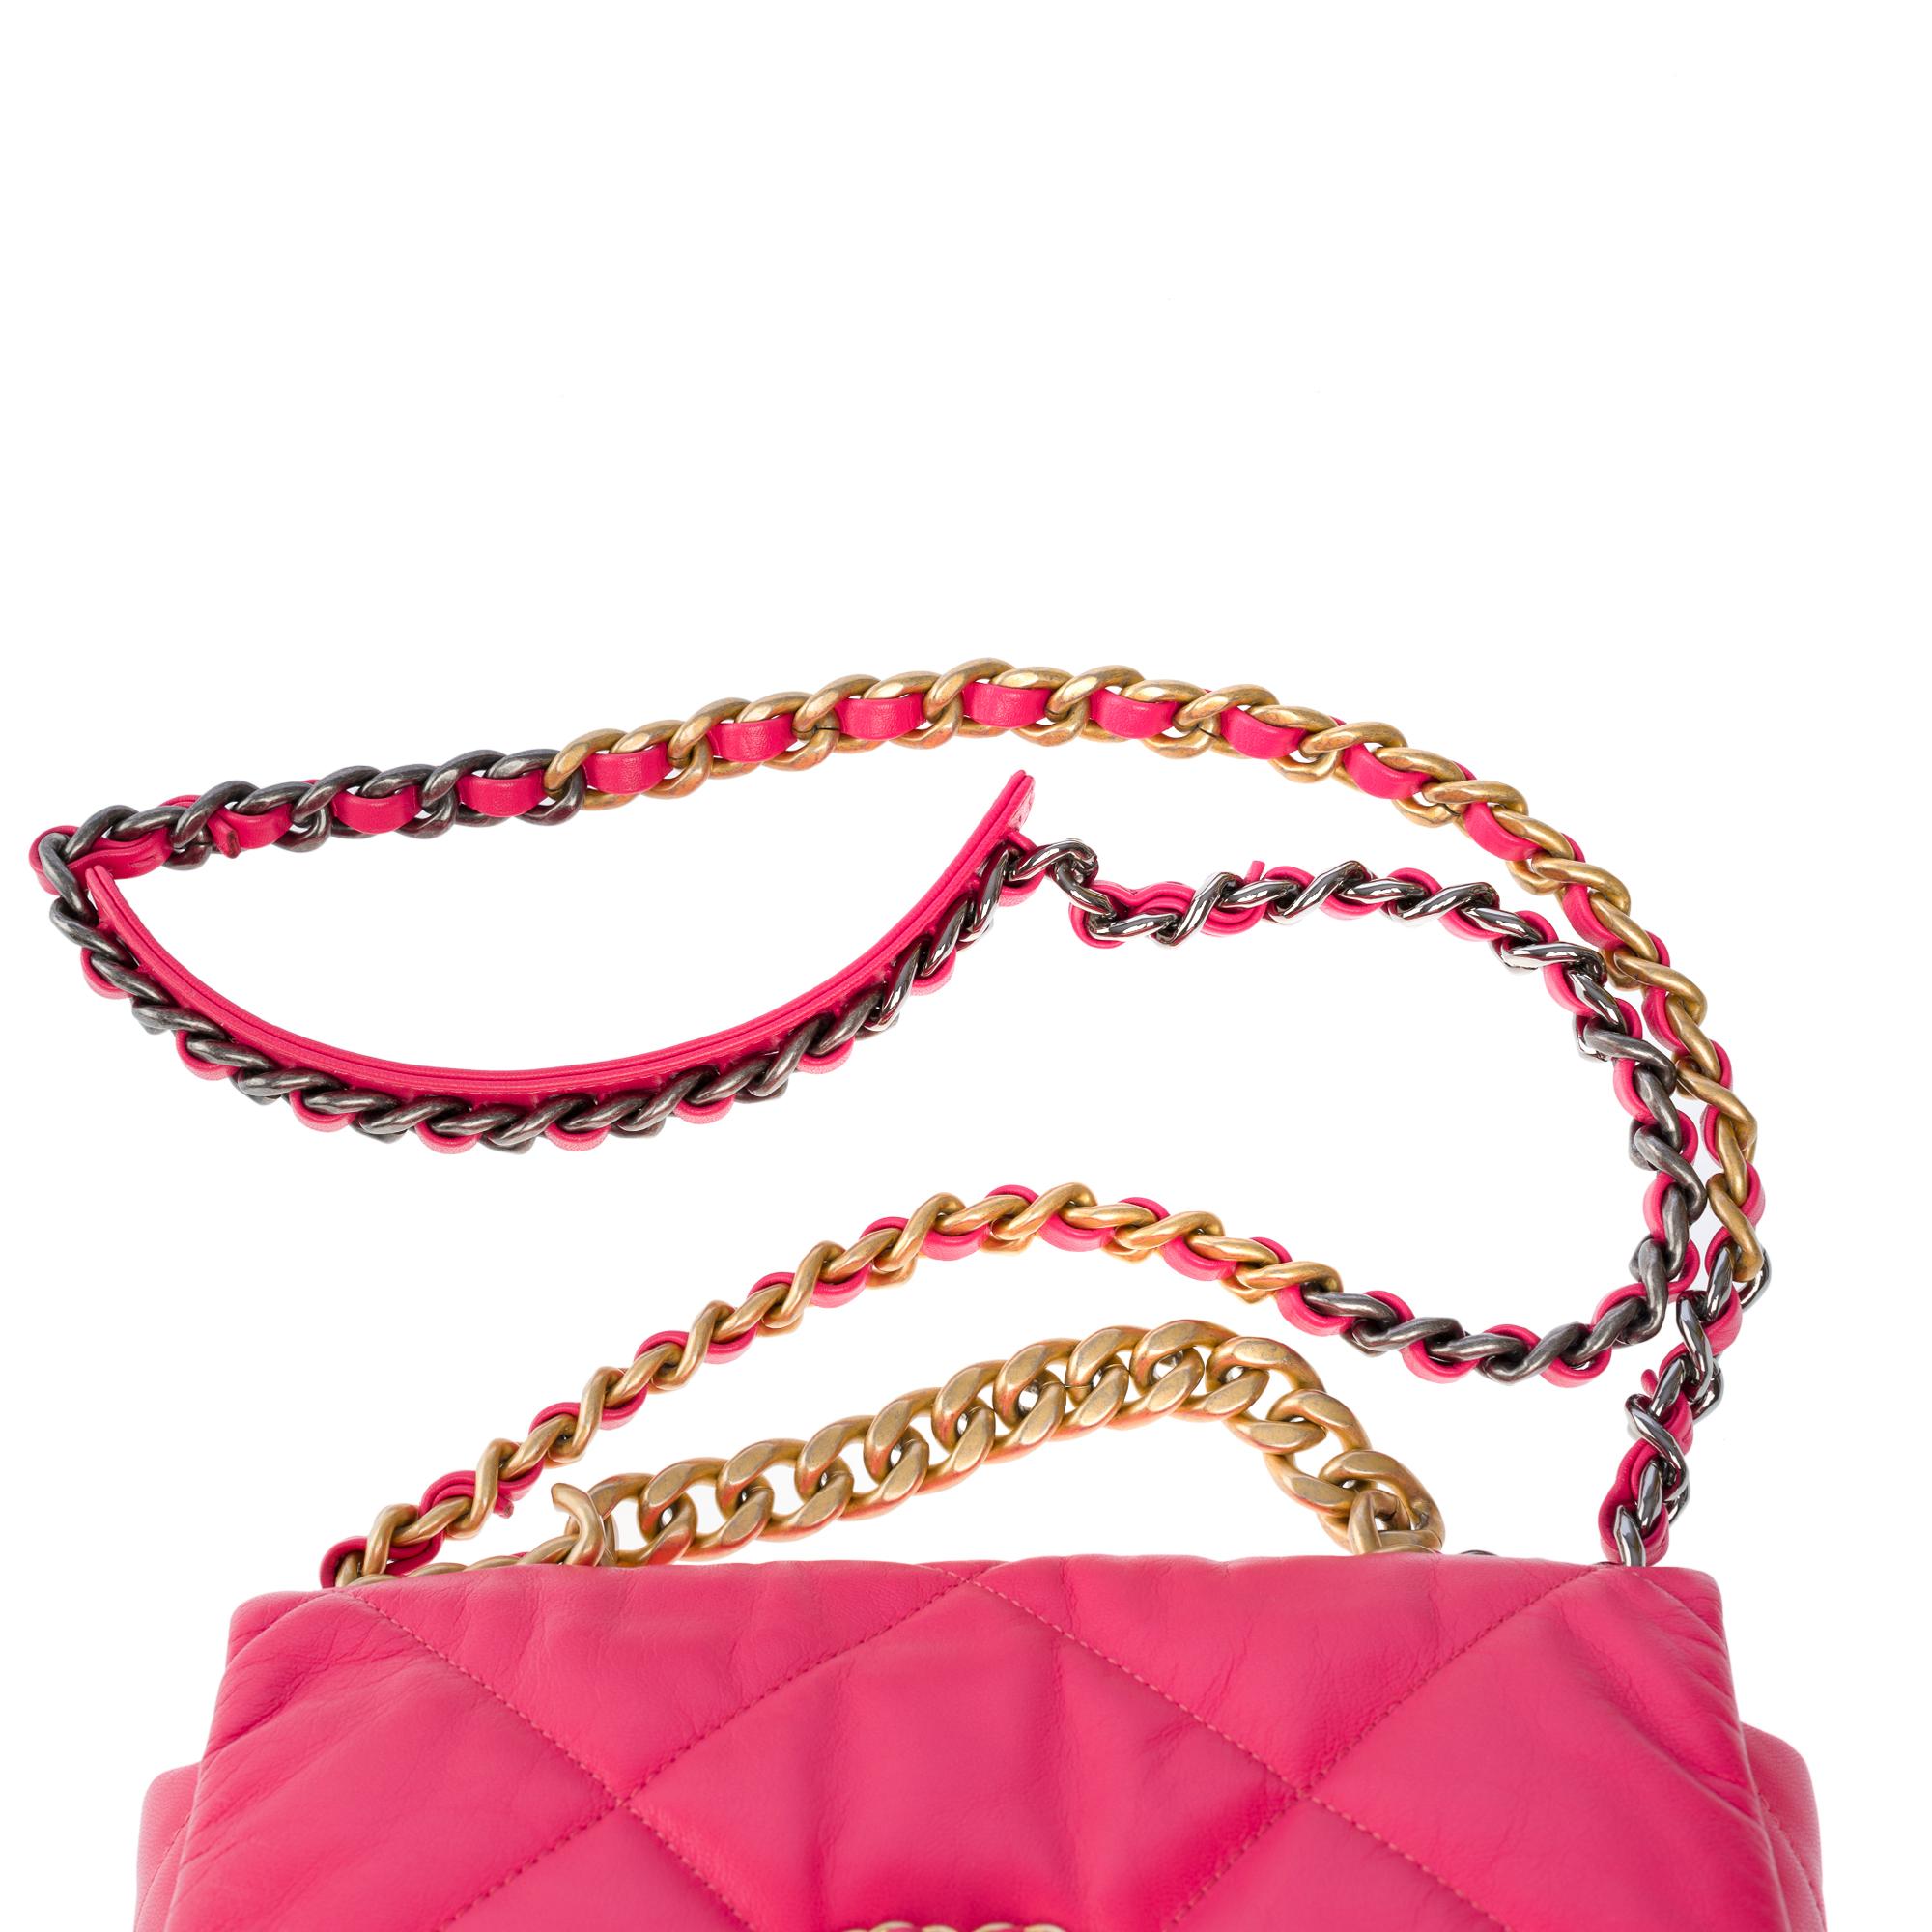 Stunning Chanel 19 shoulder bag in Pink quilted leather , Matt gold and SHW 7